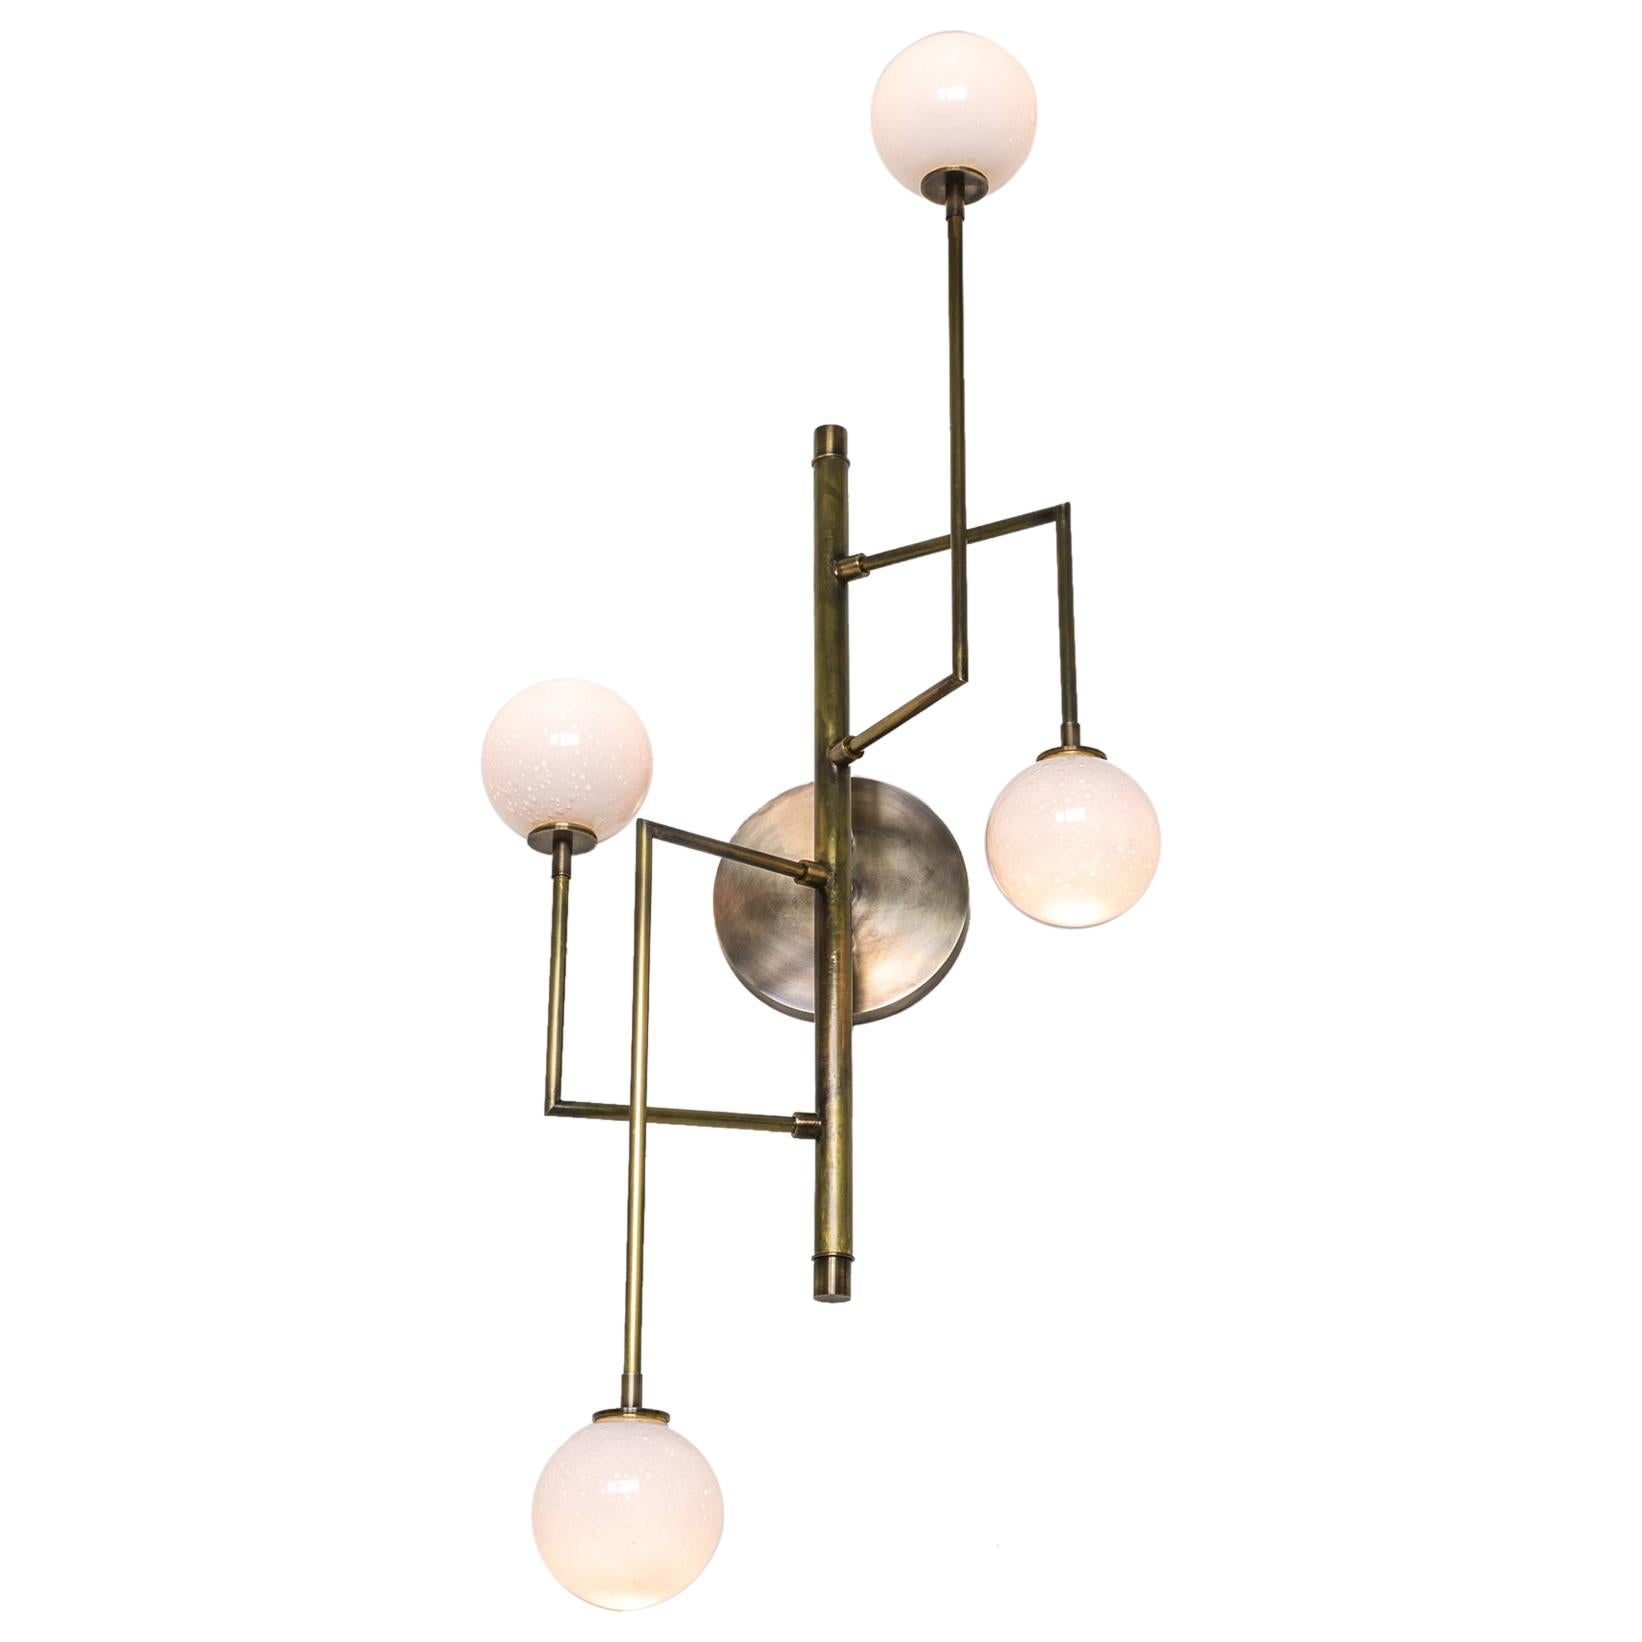 Halo Sconce 4:: Brass:: Hand Blown Glass Contemporary Wall Sconce:: Kalin Asenov